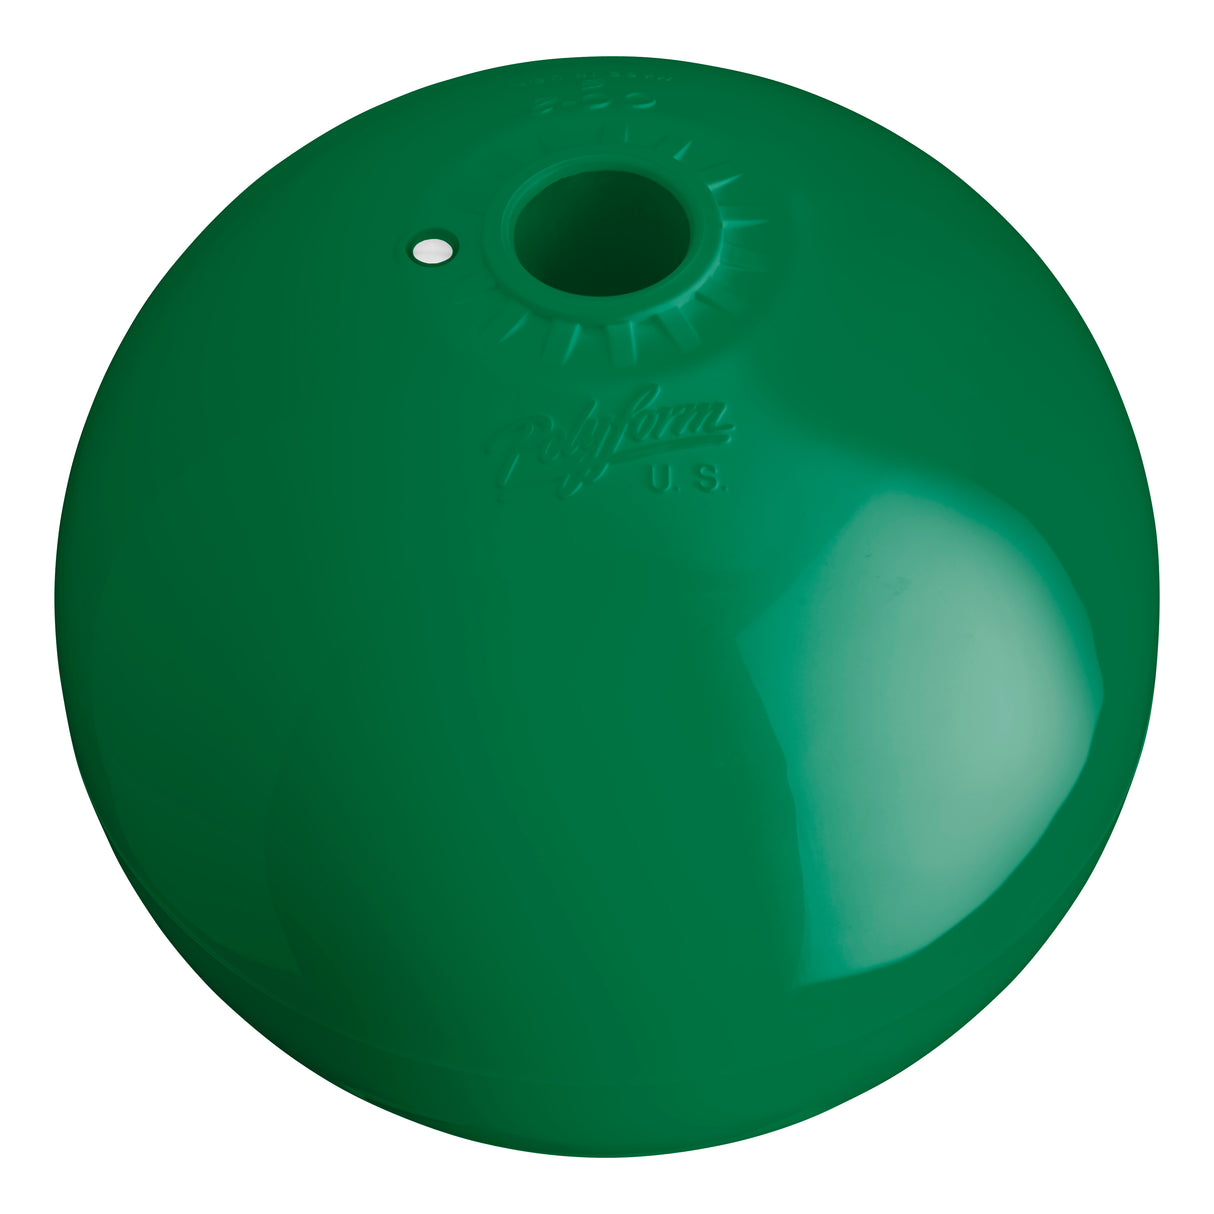 Hole through center mooring and marker buoy, Polyform CC-1 Forest Green angled shot